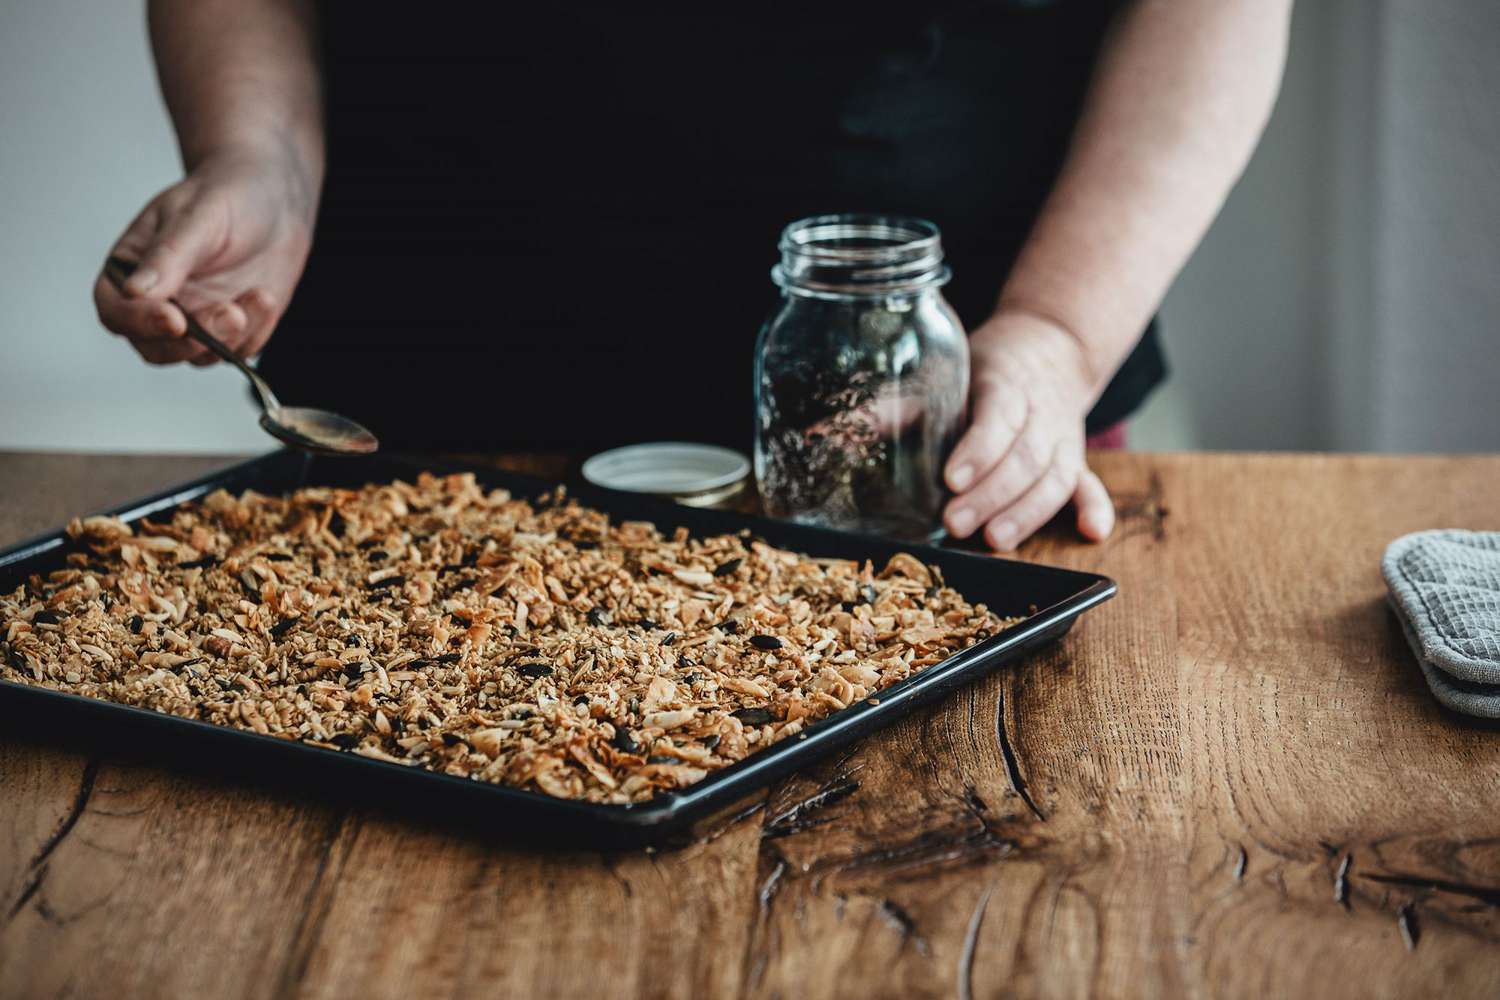 Homemade granola being scooped into a jar